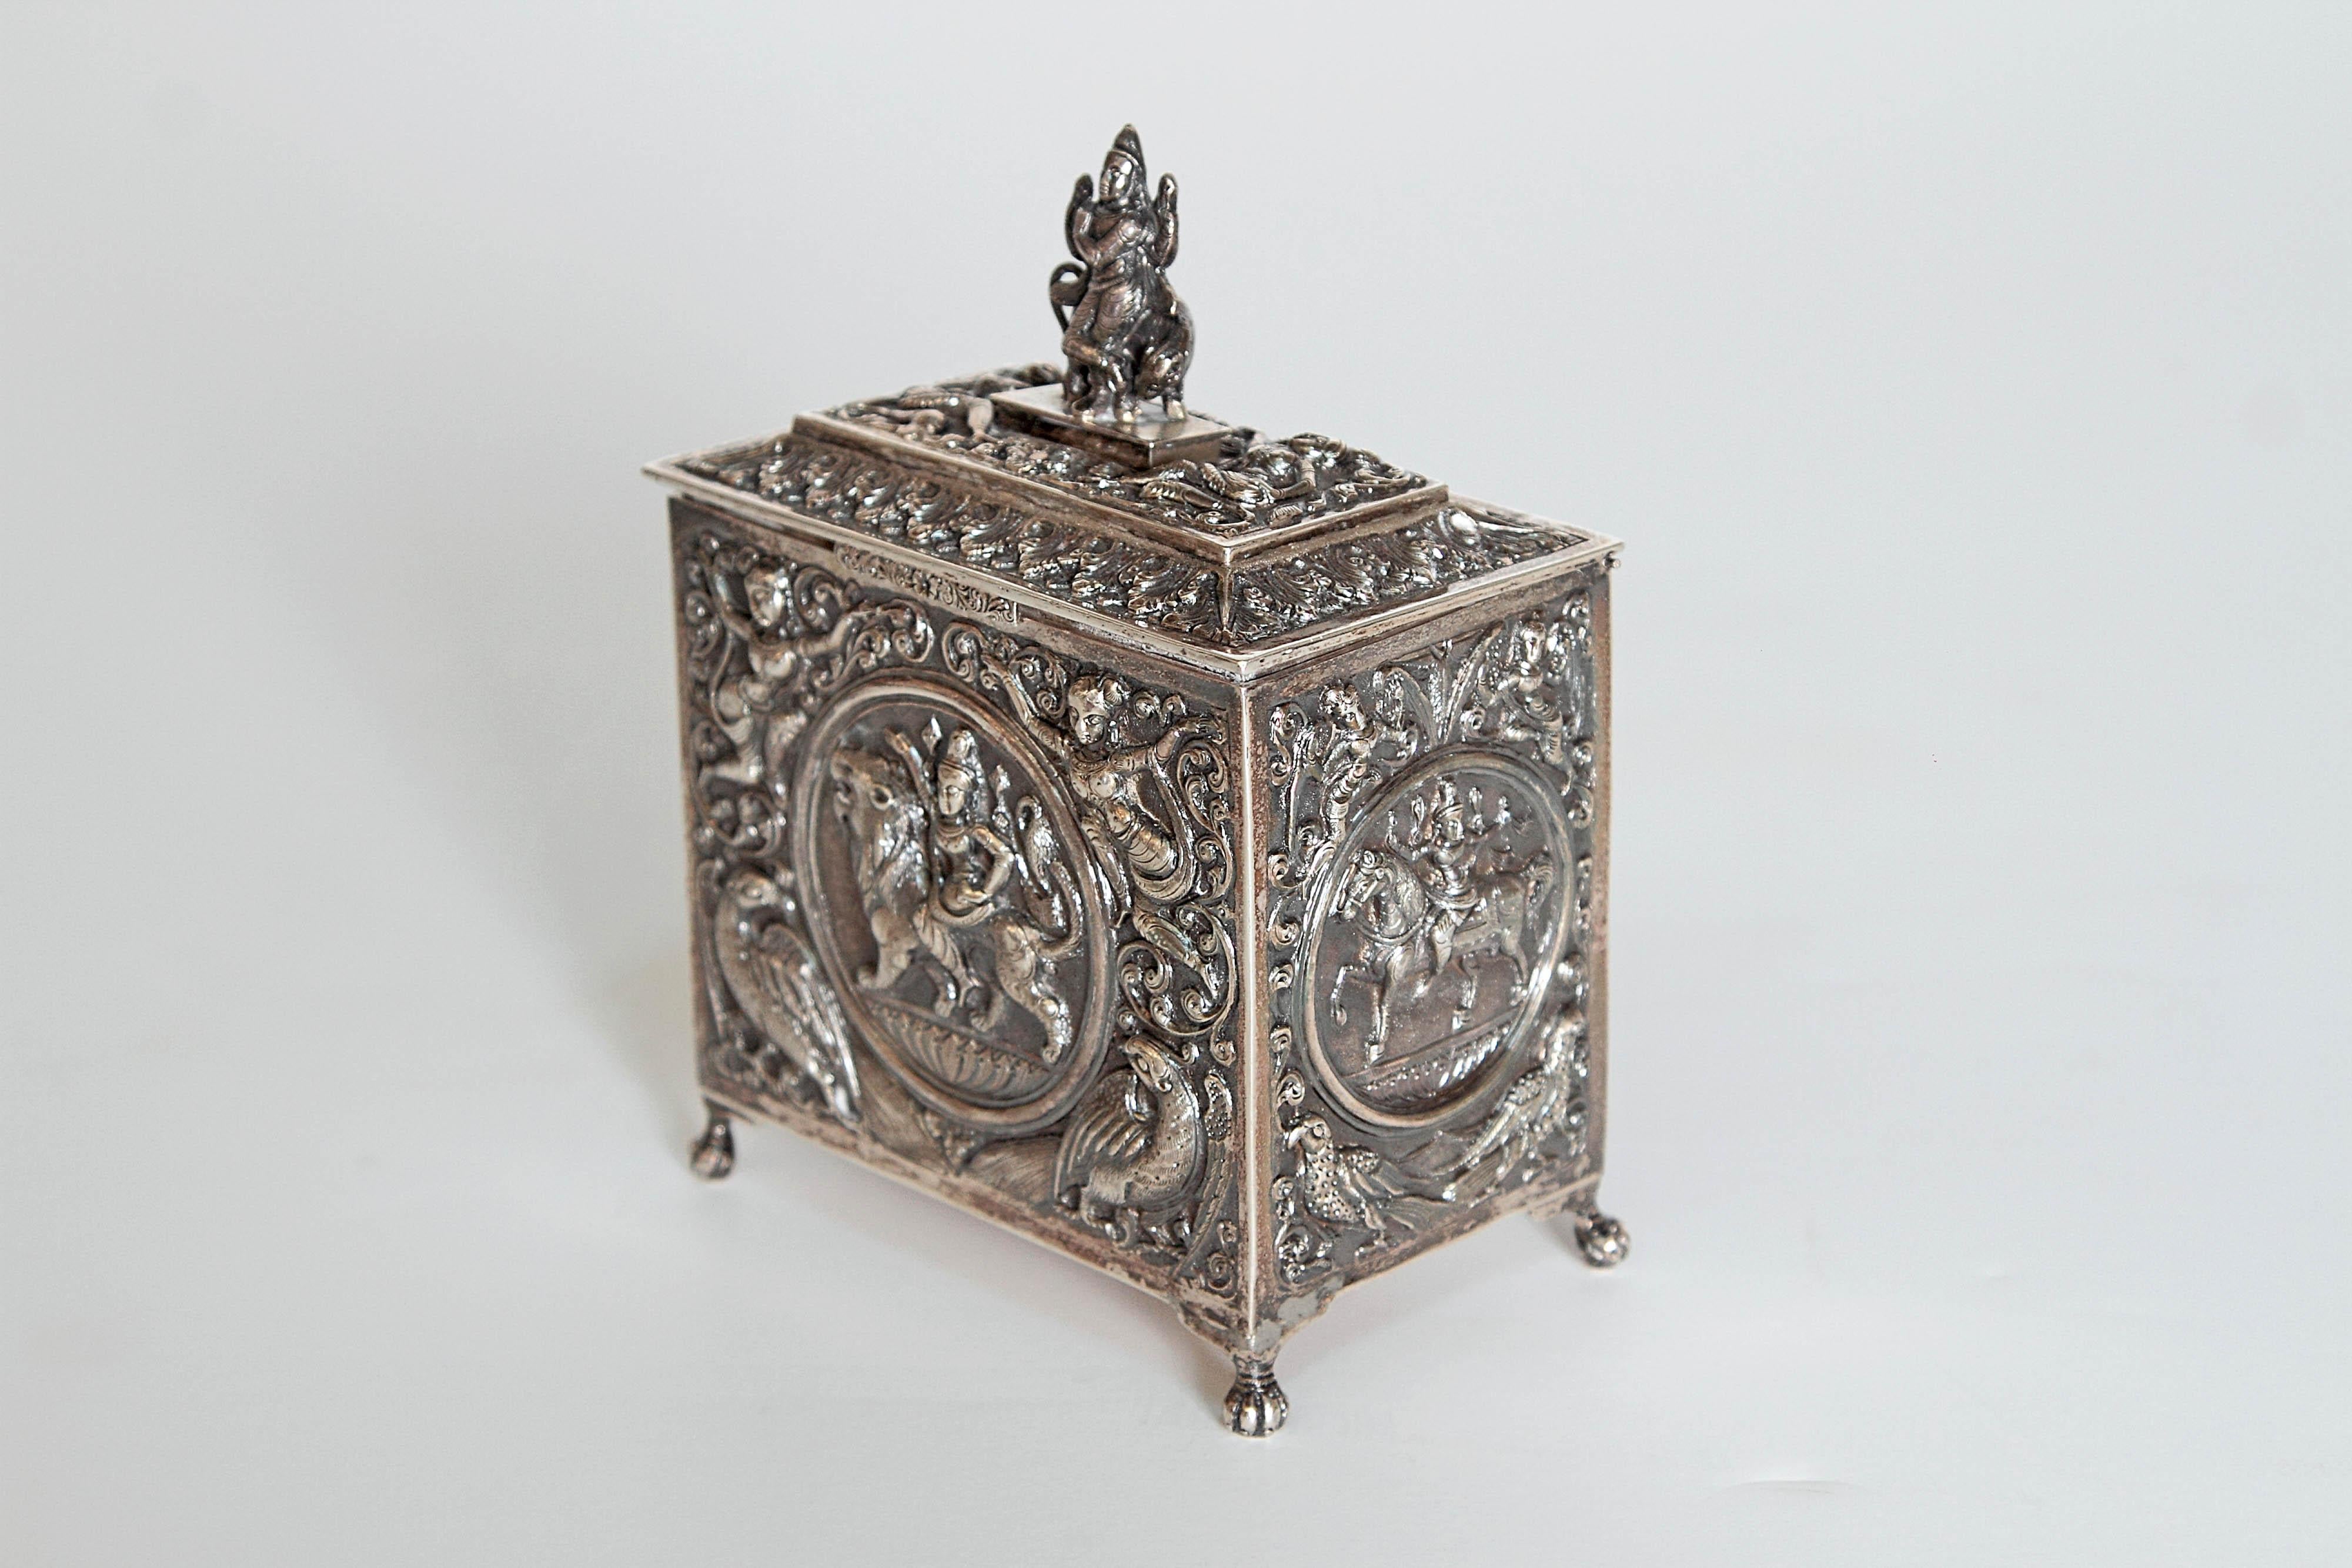 A silver plated small box from Siam. All-over relief with birds, flowers and figures. Woman on lion in front panel and Woman on tiger on rear panel. Woman on horse and sheep on end panels figure on animal as finial on lid, 19th century Siam.